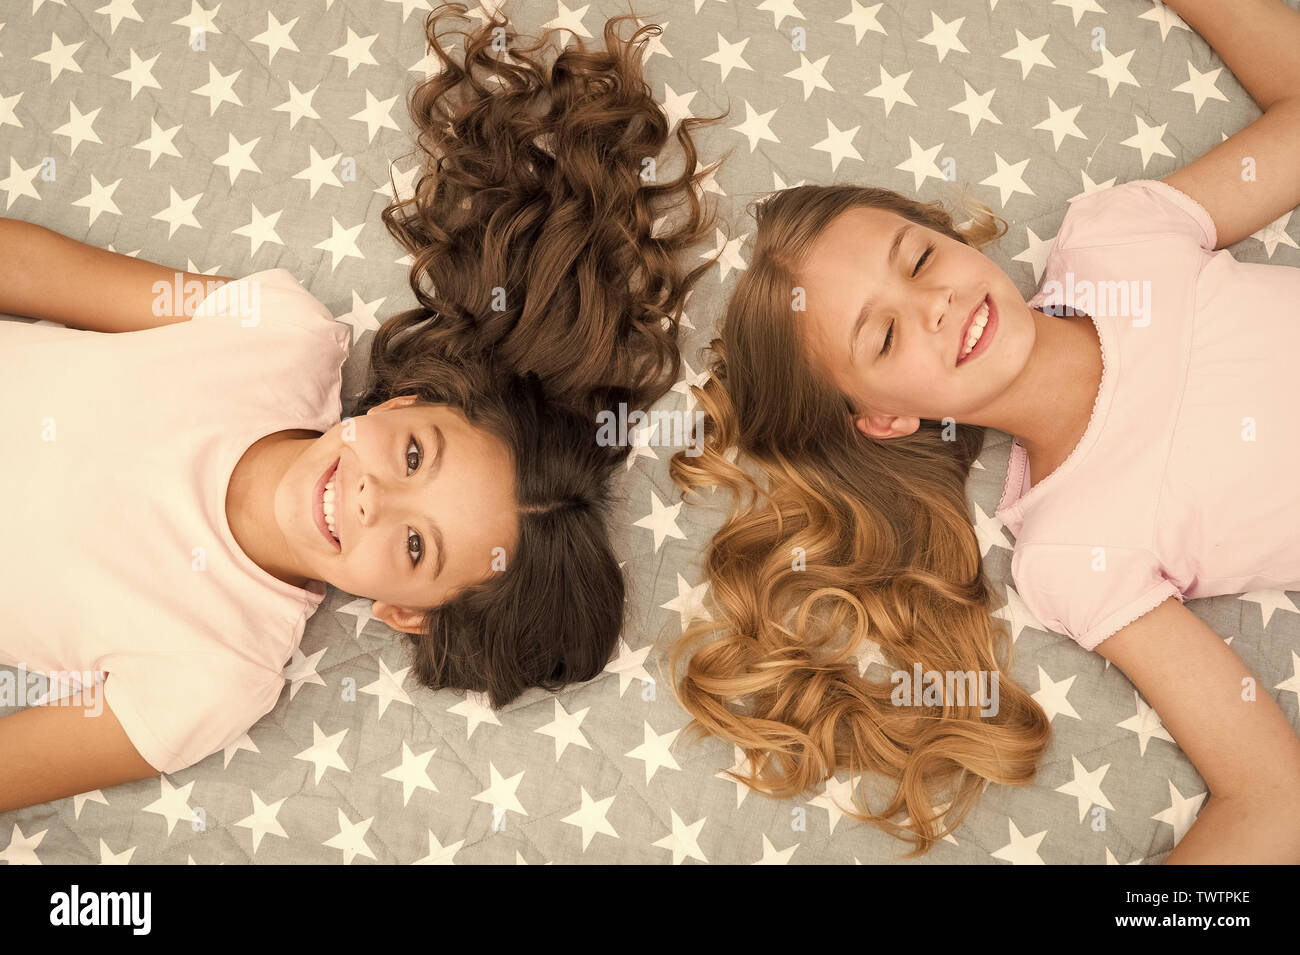 Girls with long curly hair lay on bed top view. Children perfect curly  hairstyle looks cute. Conditioner mask organic oil keep hair shiny and  healthy. Amazing curls tips. Make it curly but